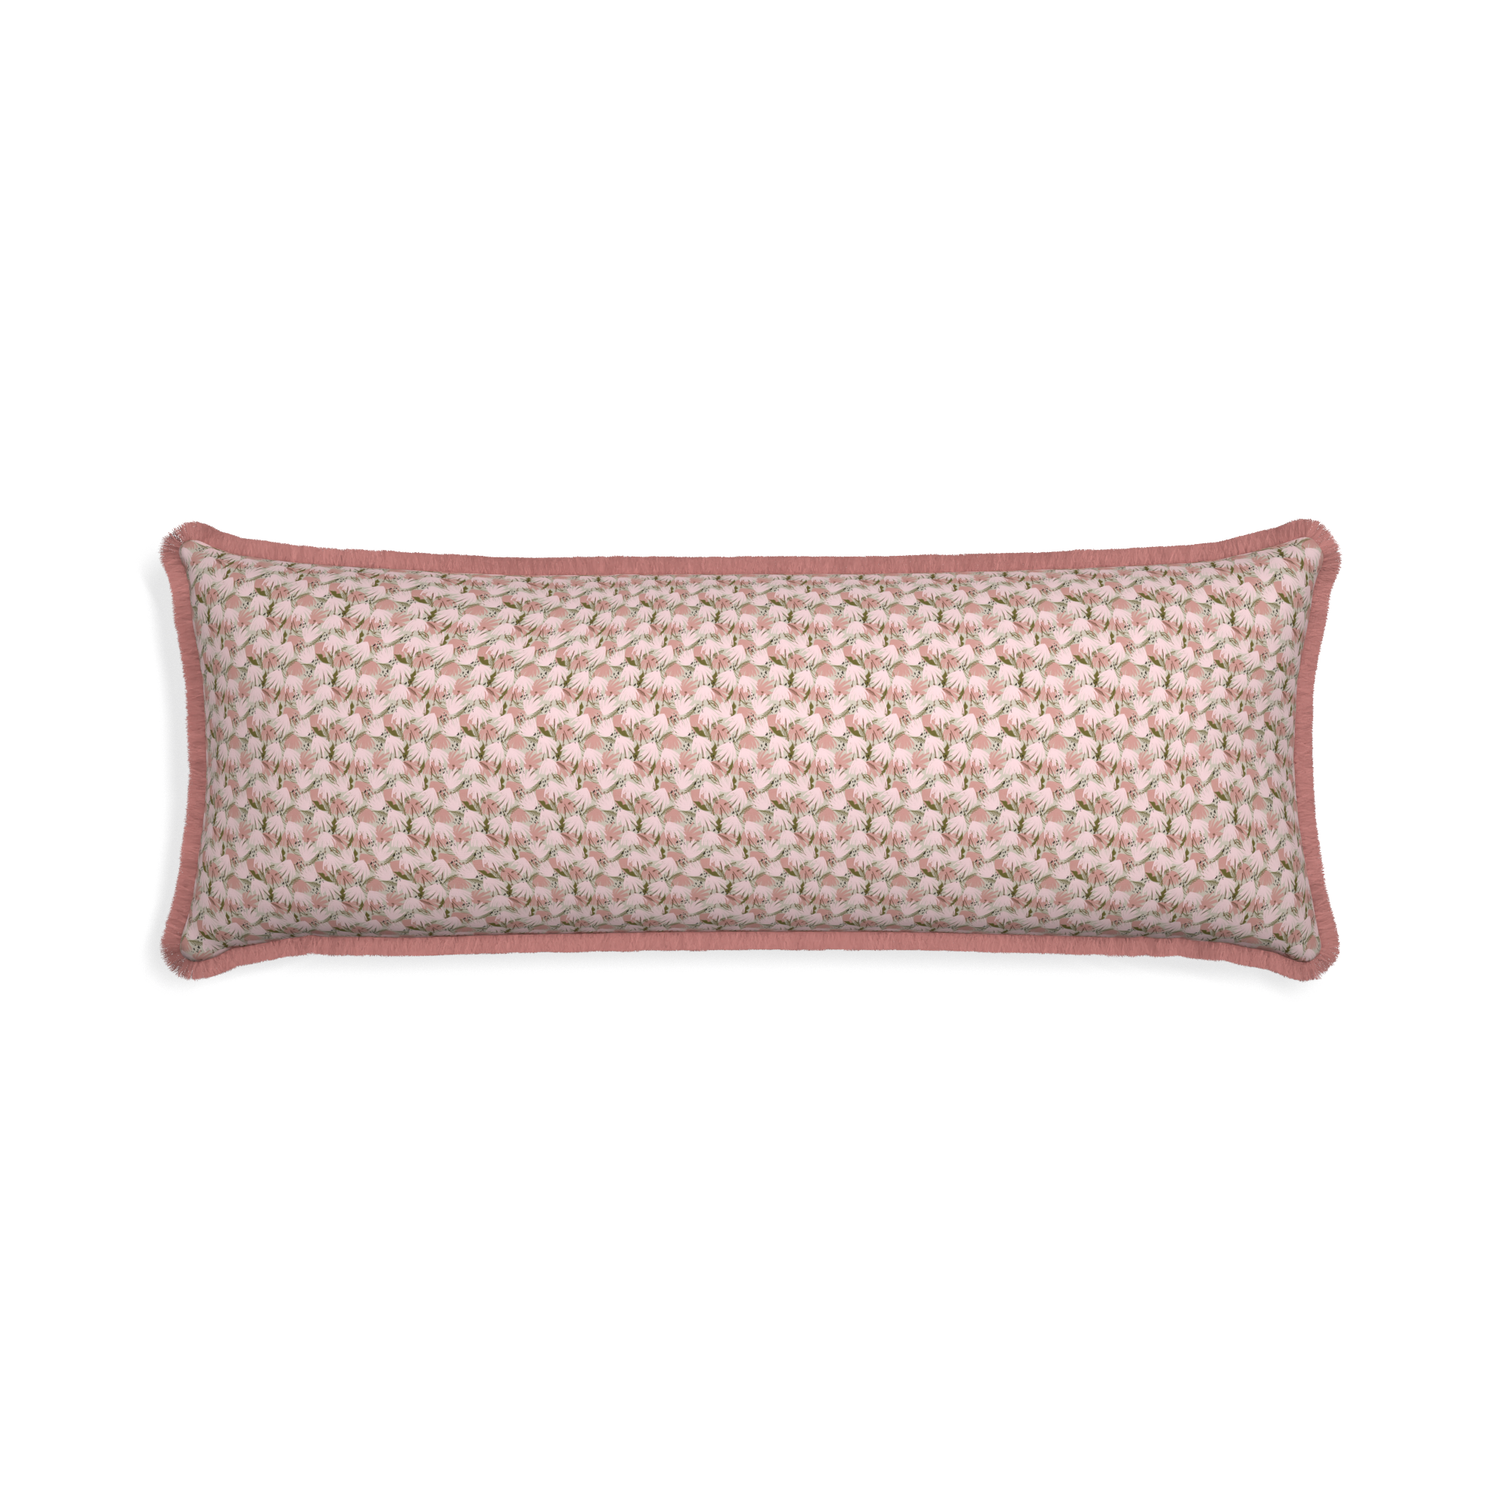 Xl-lumbar eden pink custom pink floralpillow with d fringe on white background